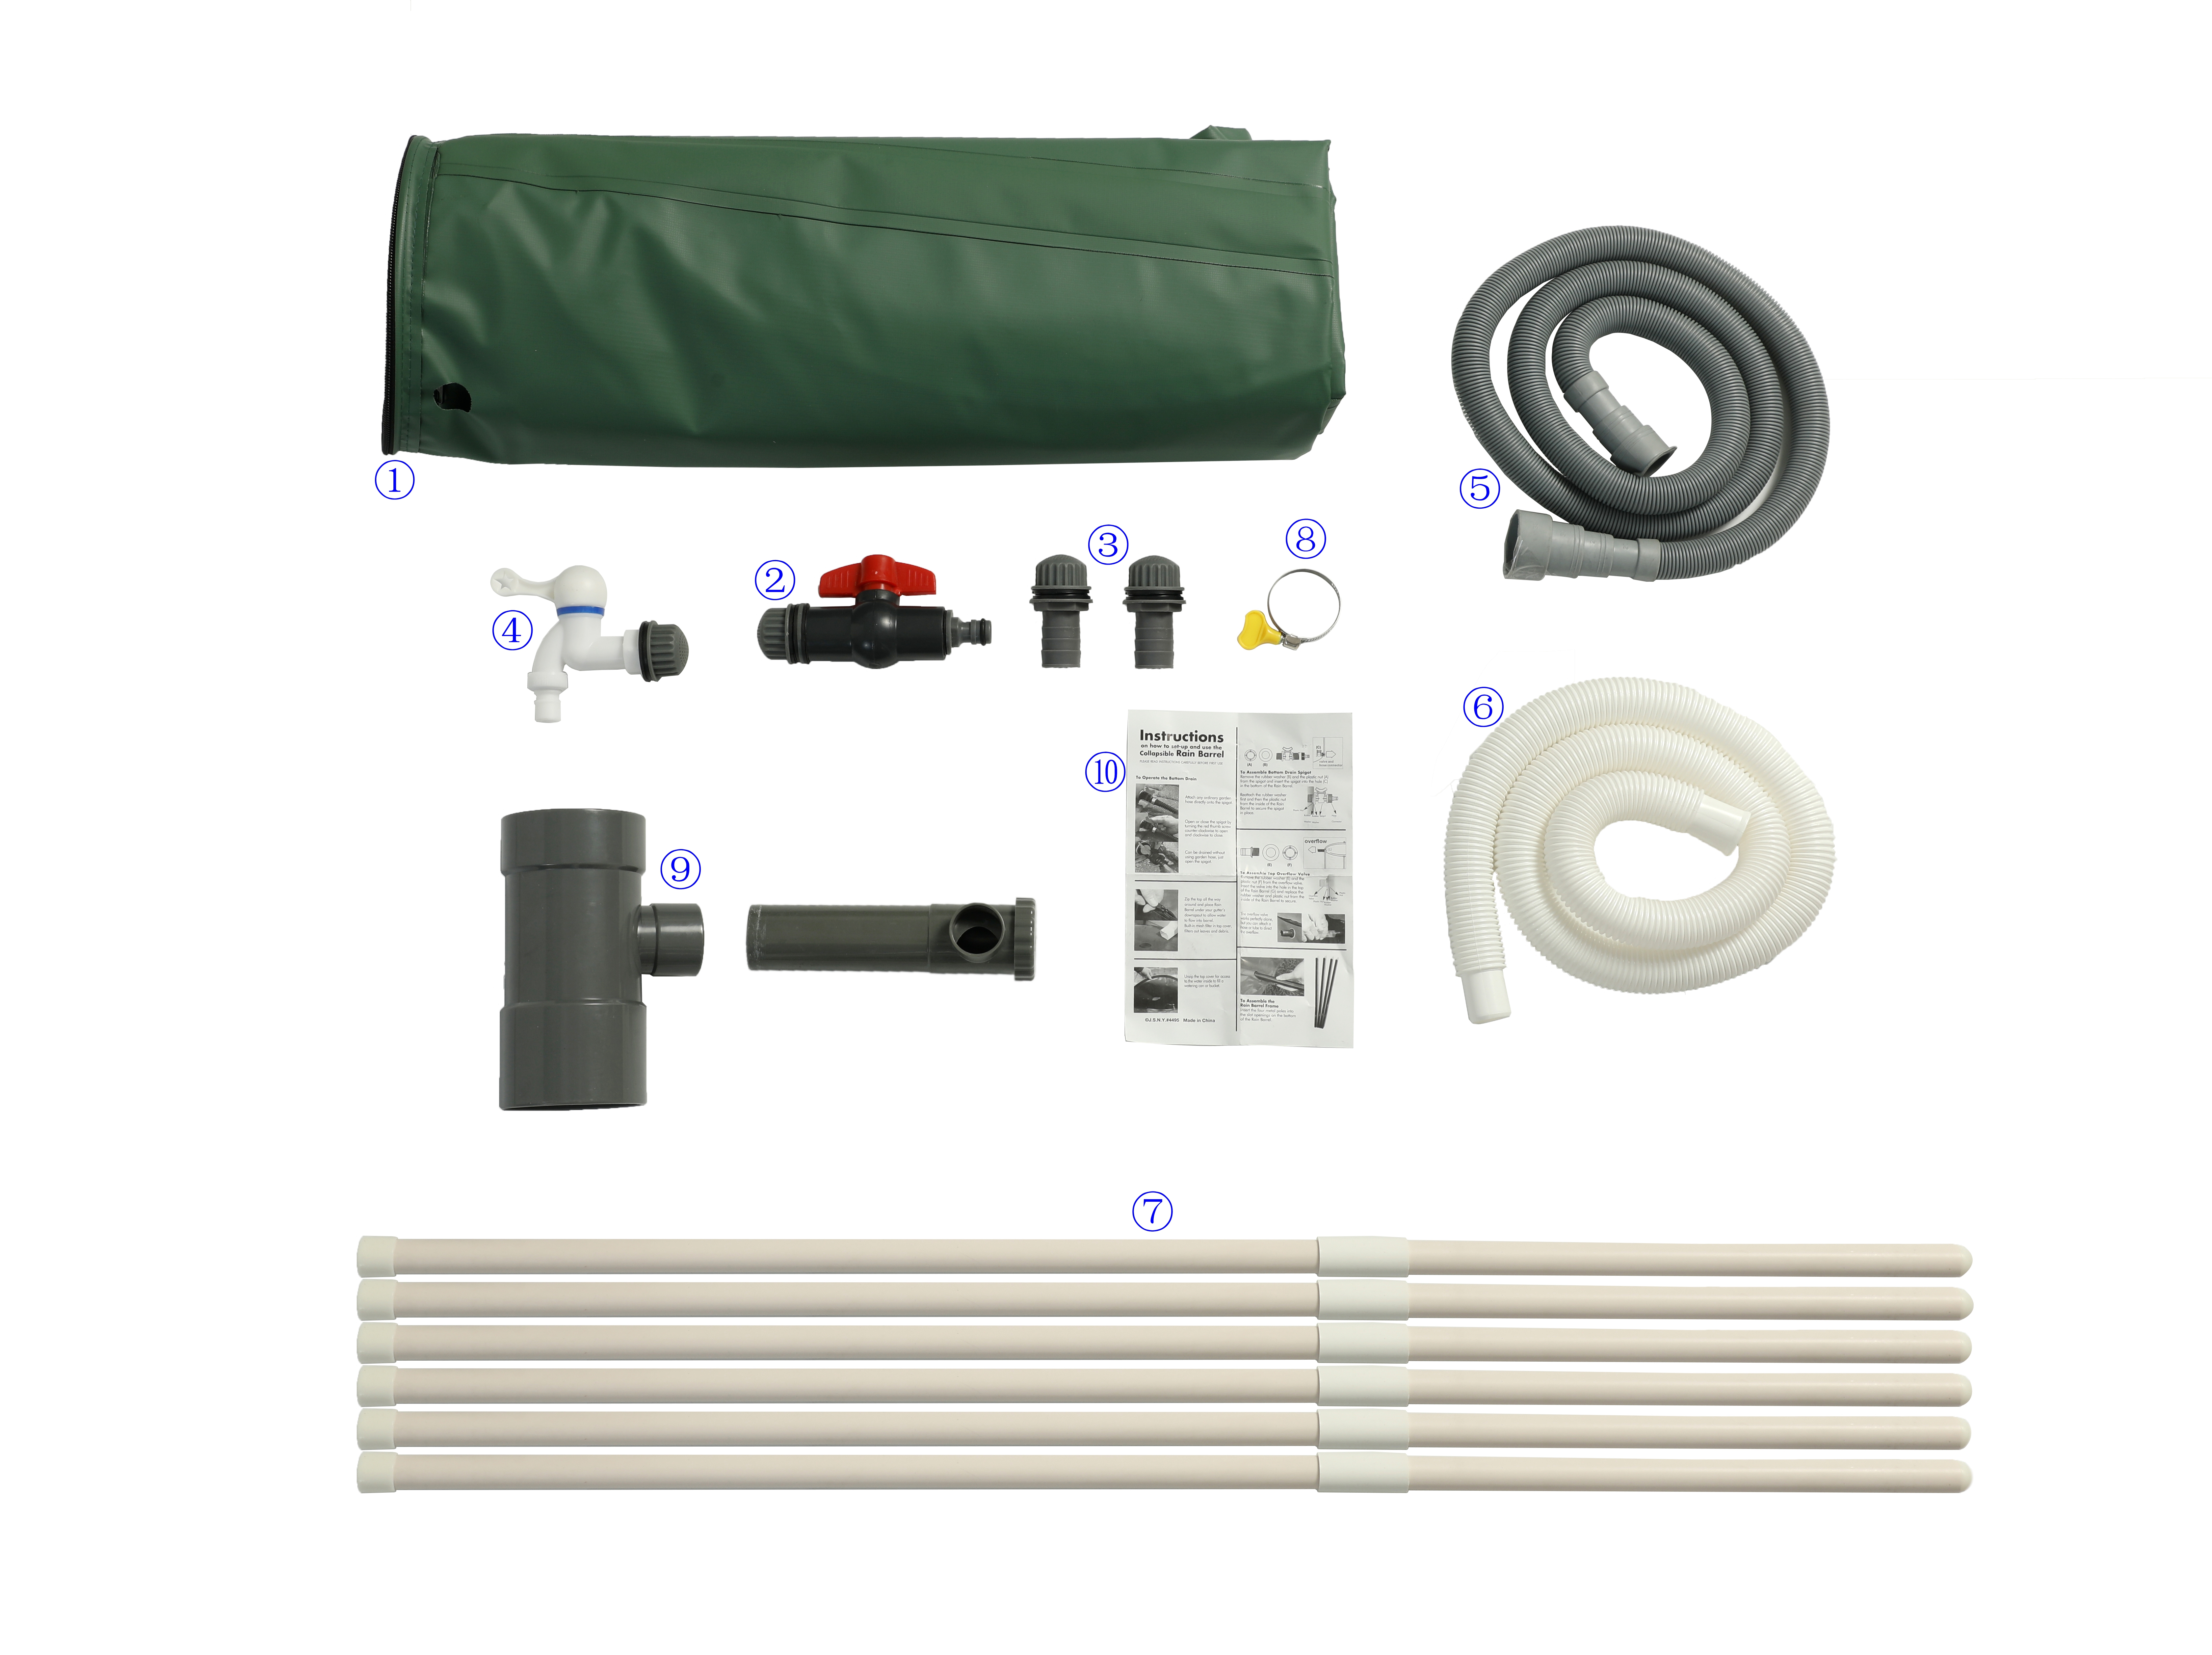 Buy Discount Of Portable PVC Rainwater Barrel 1000 Liter With Gather Rain System